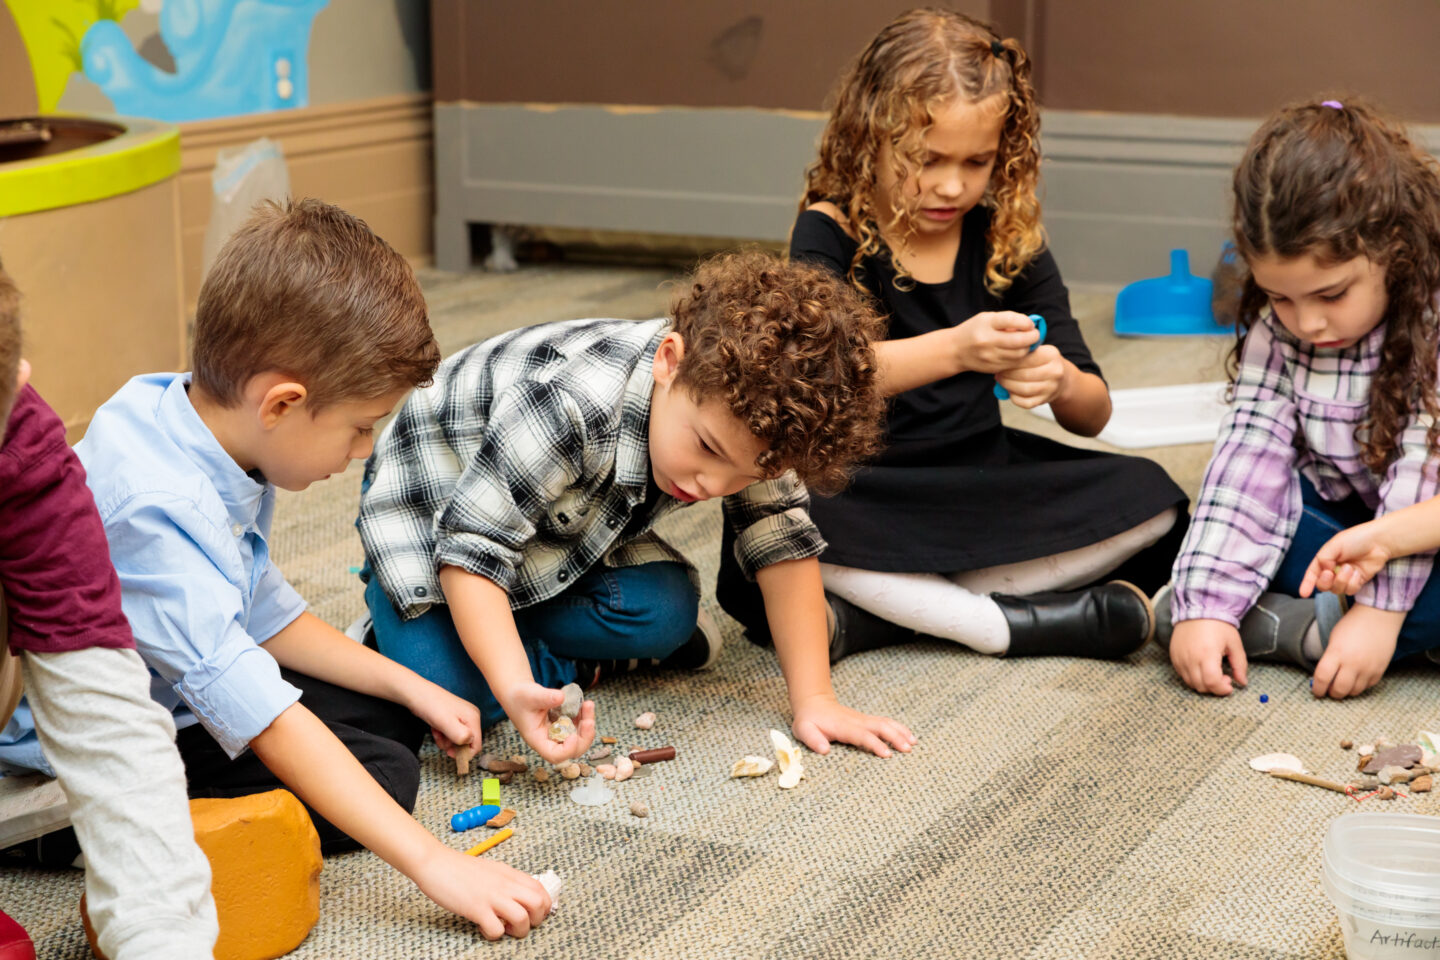 Winter Break Drop-In Activity Centre: Dig It! Archaeology 101 with the Hamilton Children’s Museum